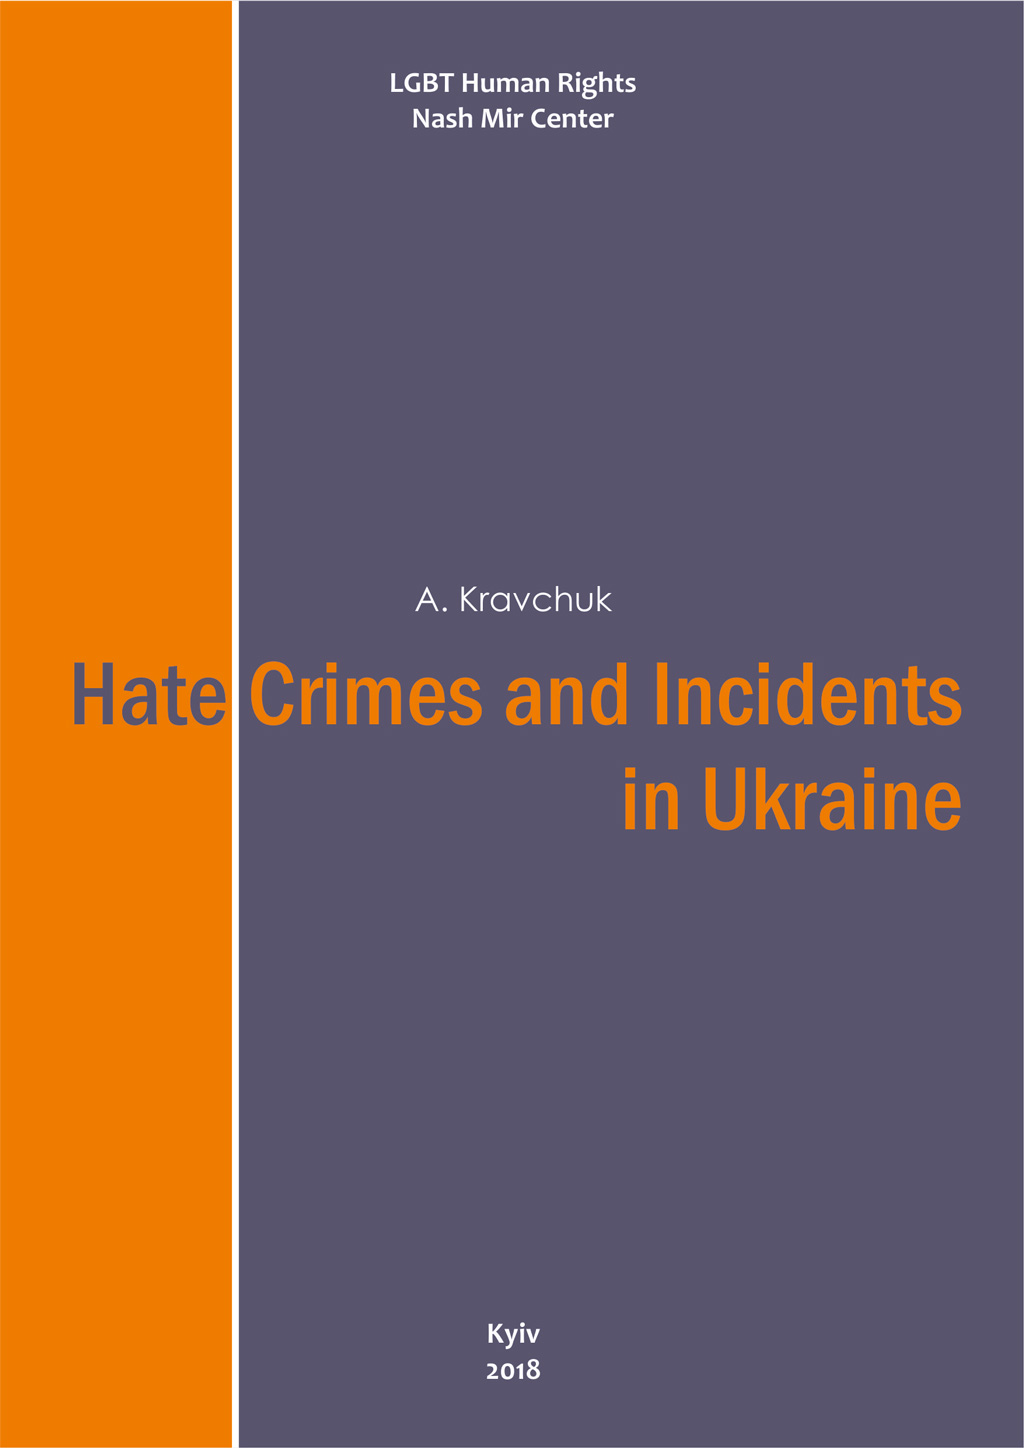 Hate crimes and incidents in Ukraine